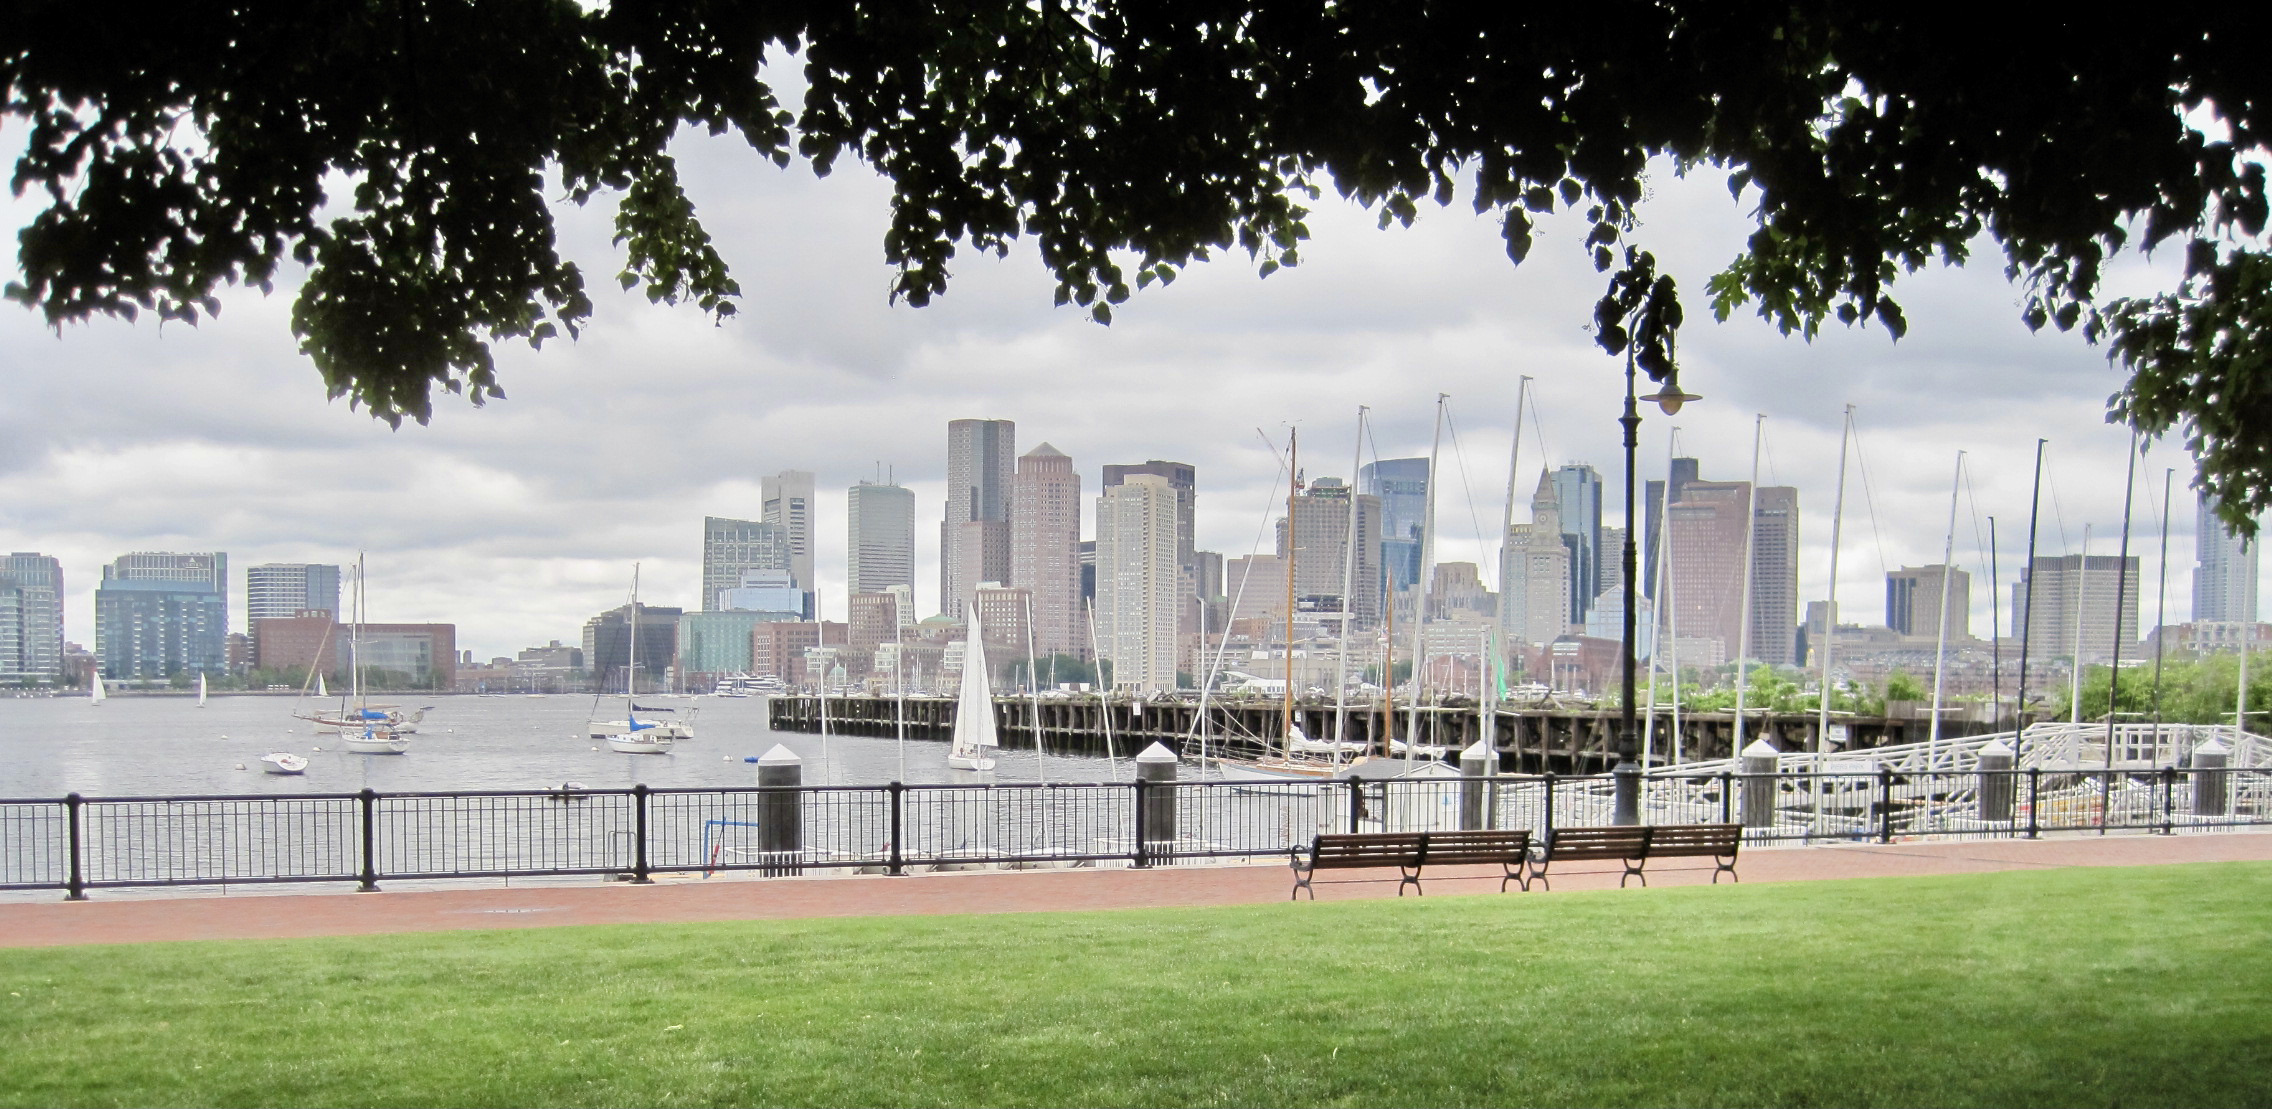 Photo of sailboats and Boston skyline from Piers Park in East Boston MA